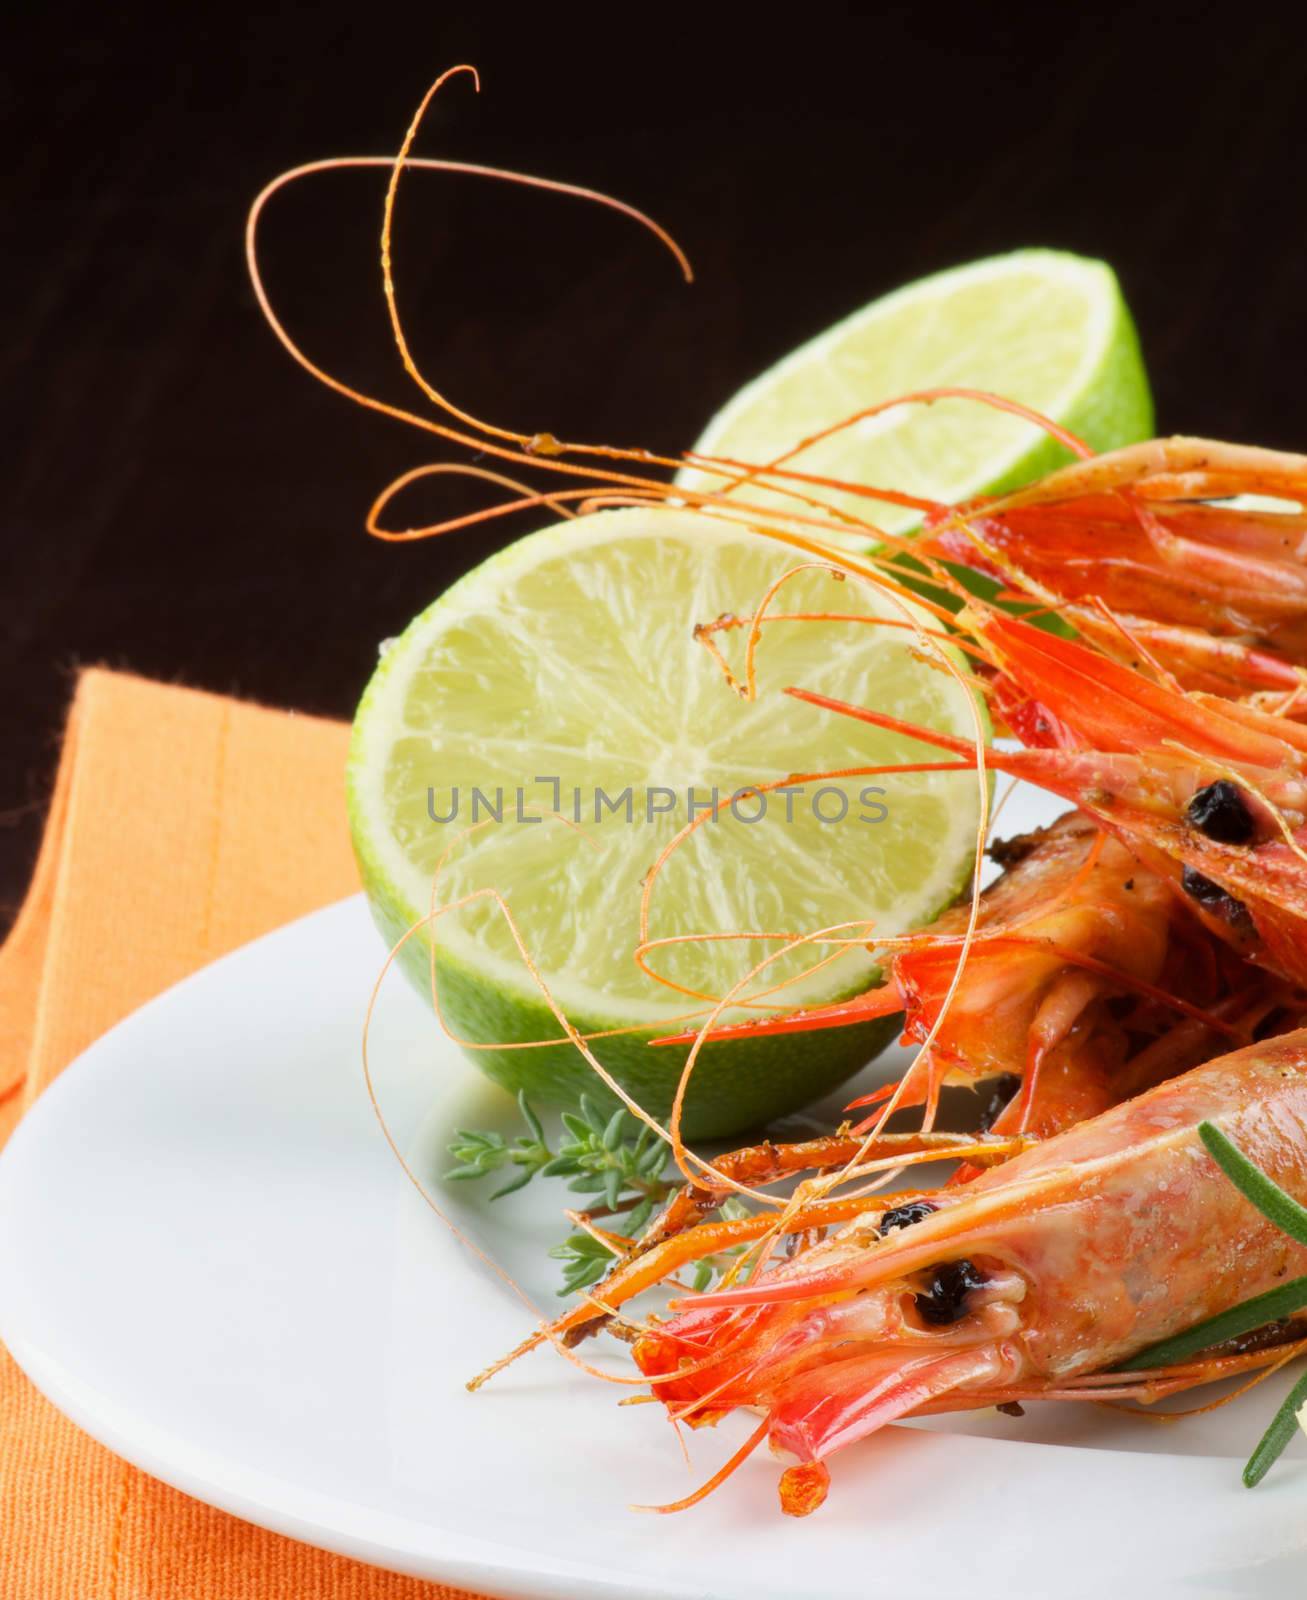 Delicious Roasted Shrimps by zhekos